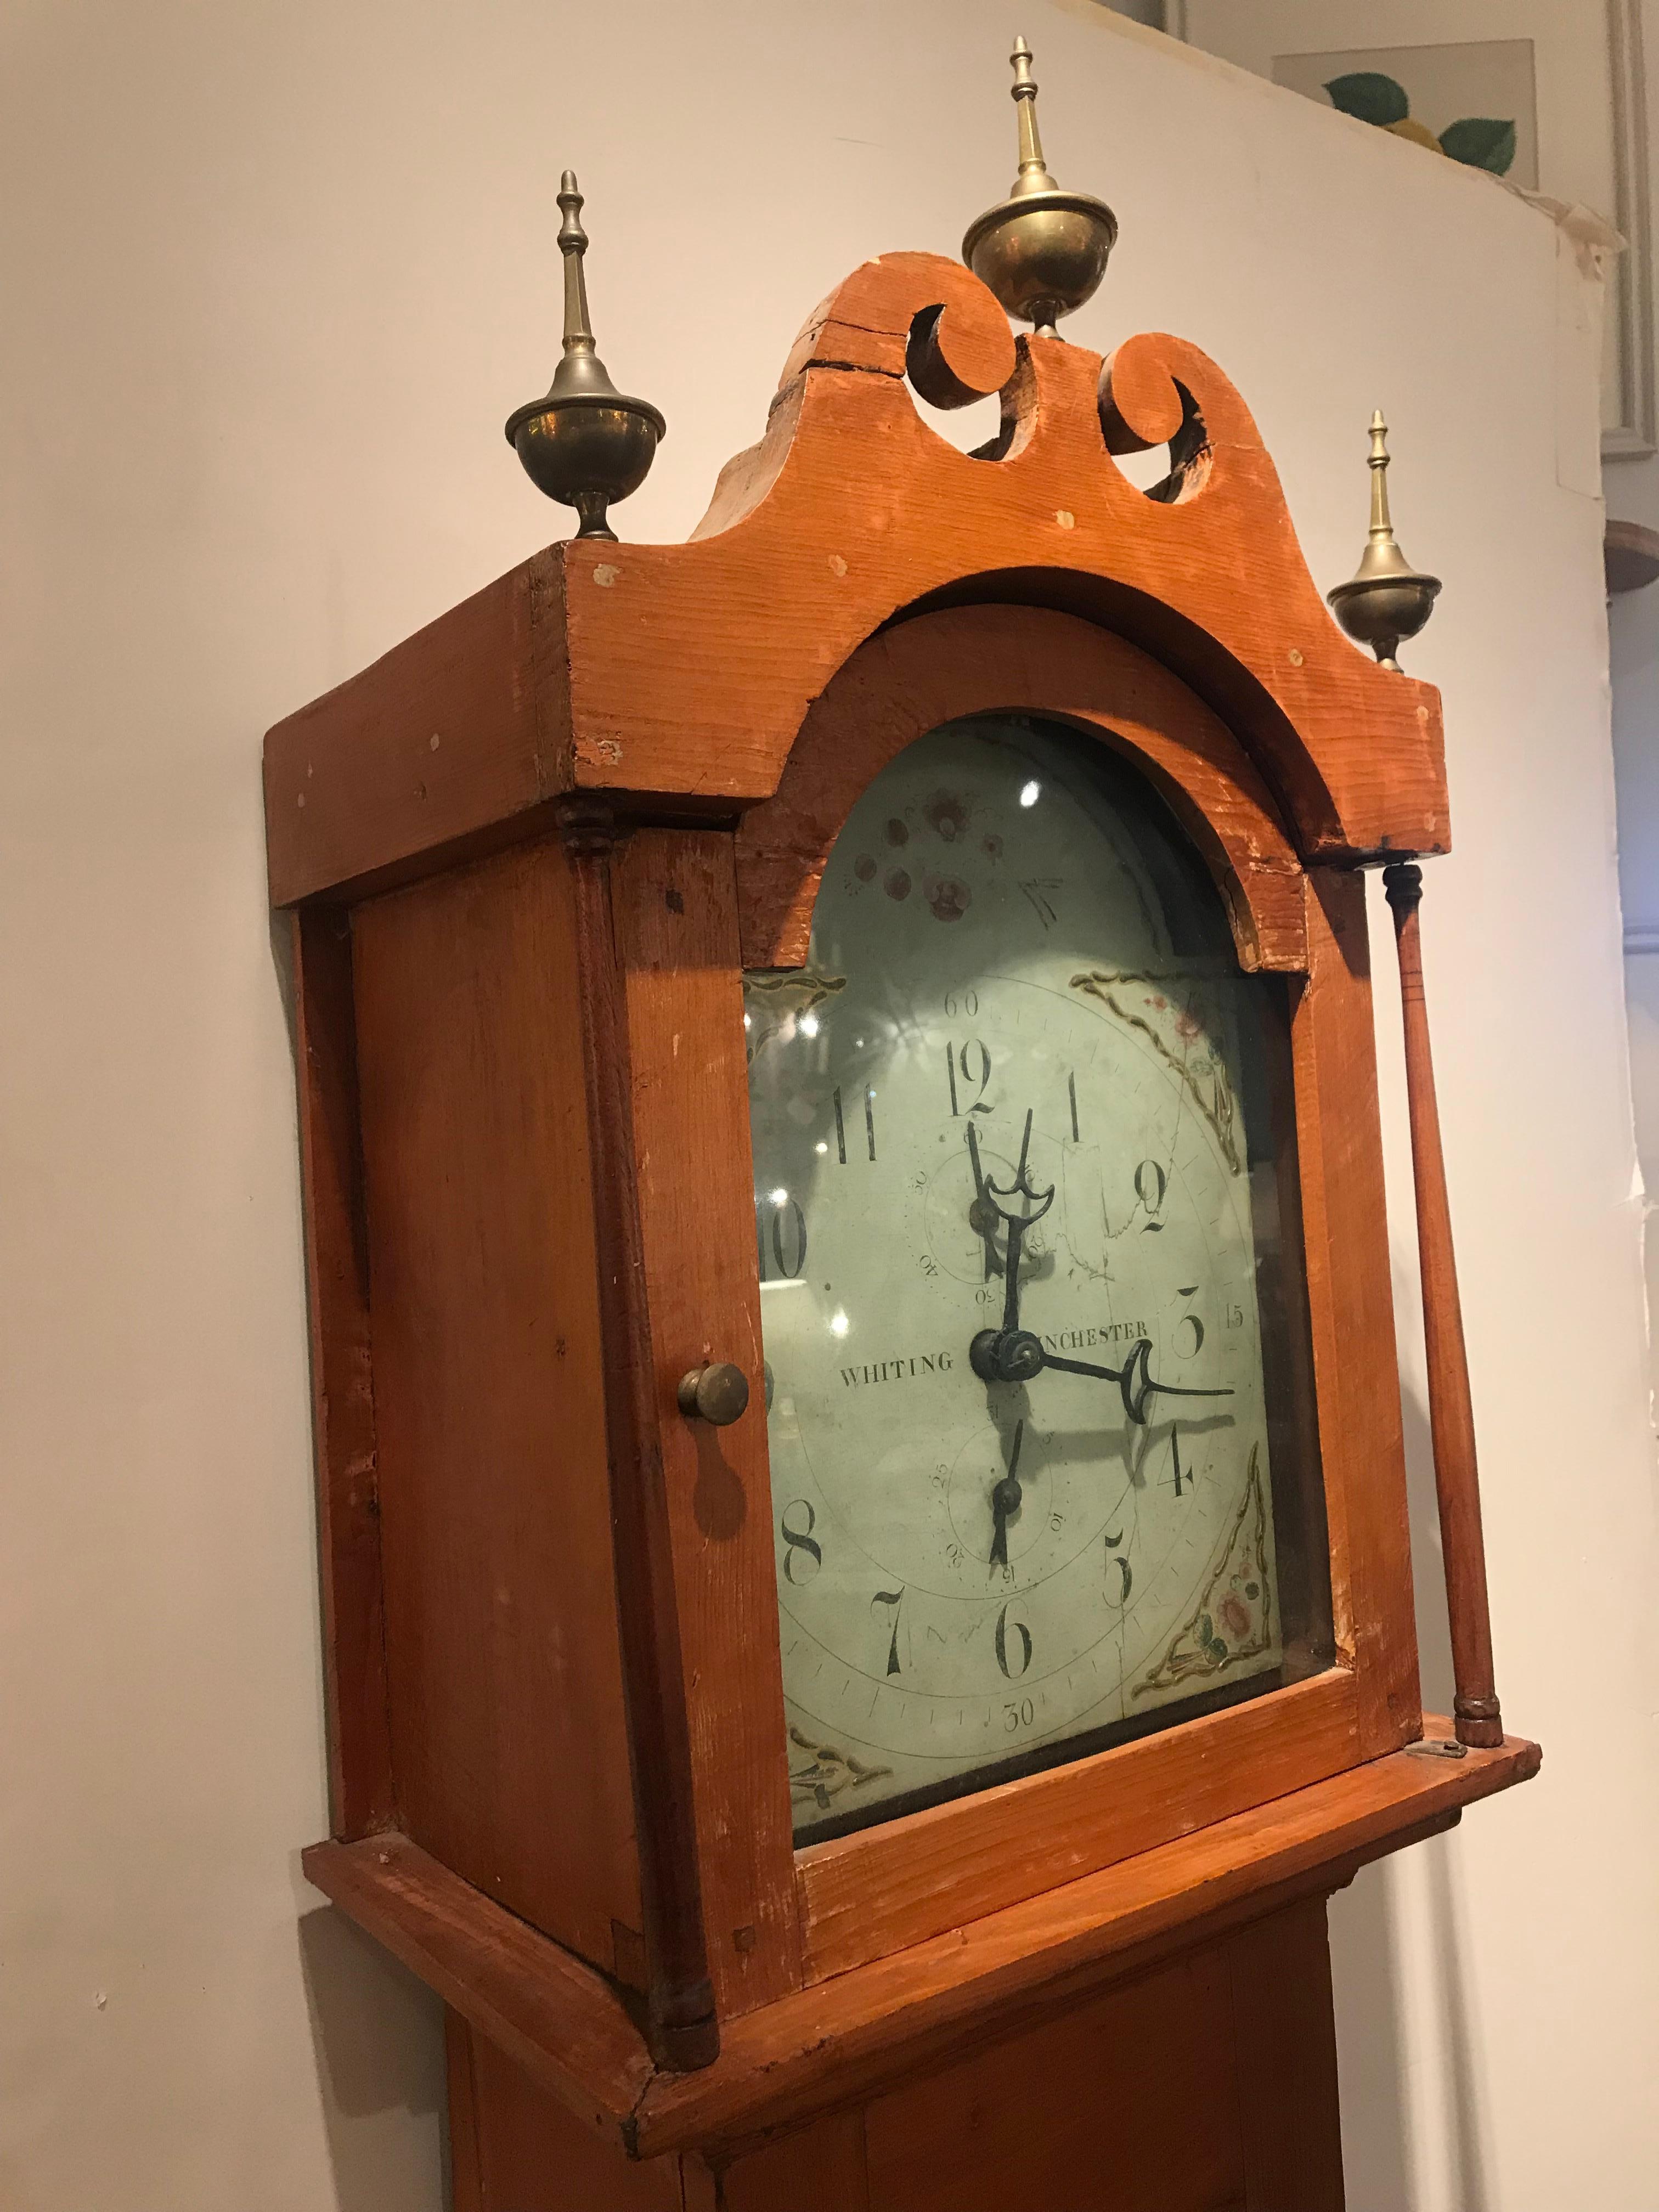 Riley whiting pine tall clock, Winchester, CT, circa 1818.
Pine case housing a wooden works movement and a painted wooden dial.